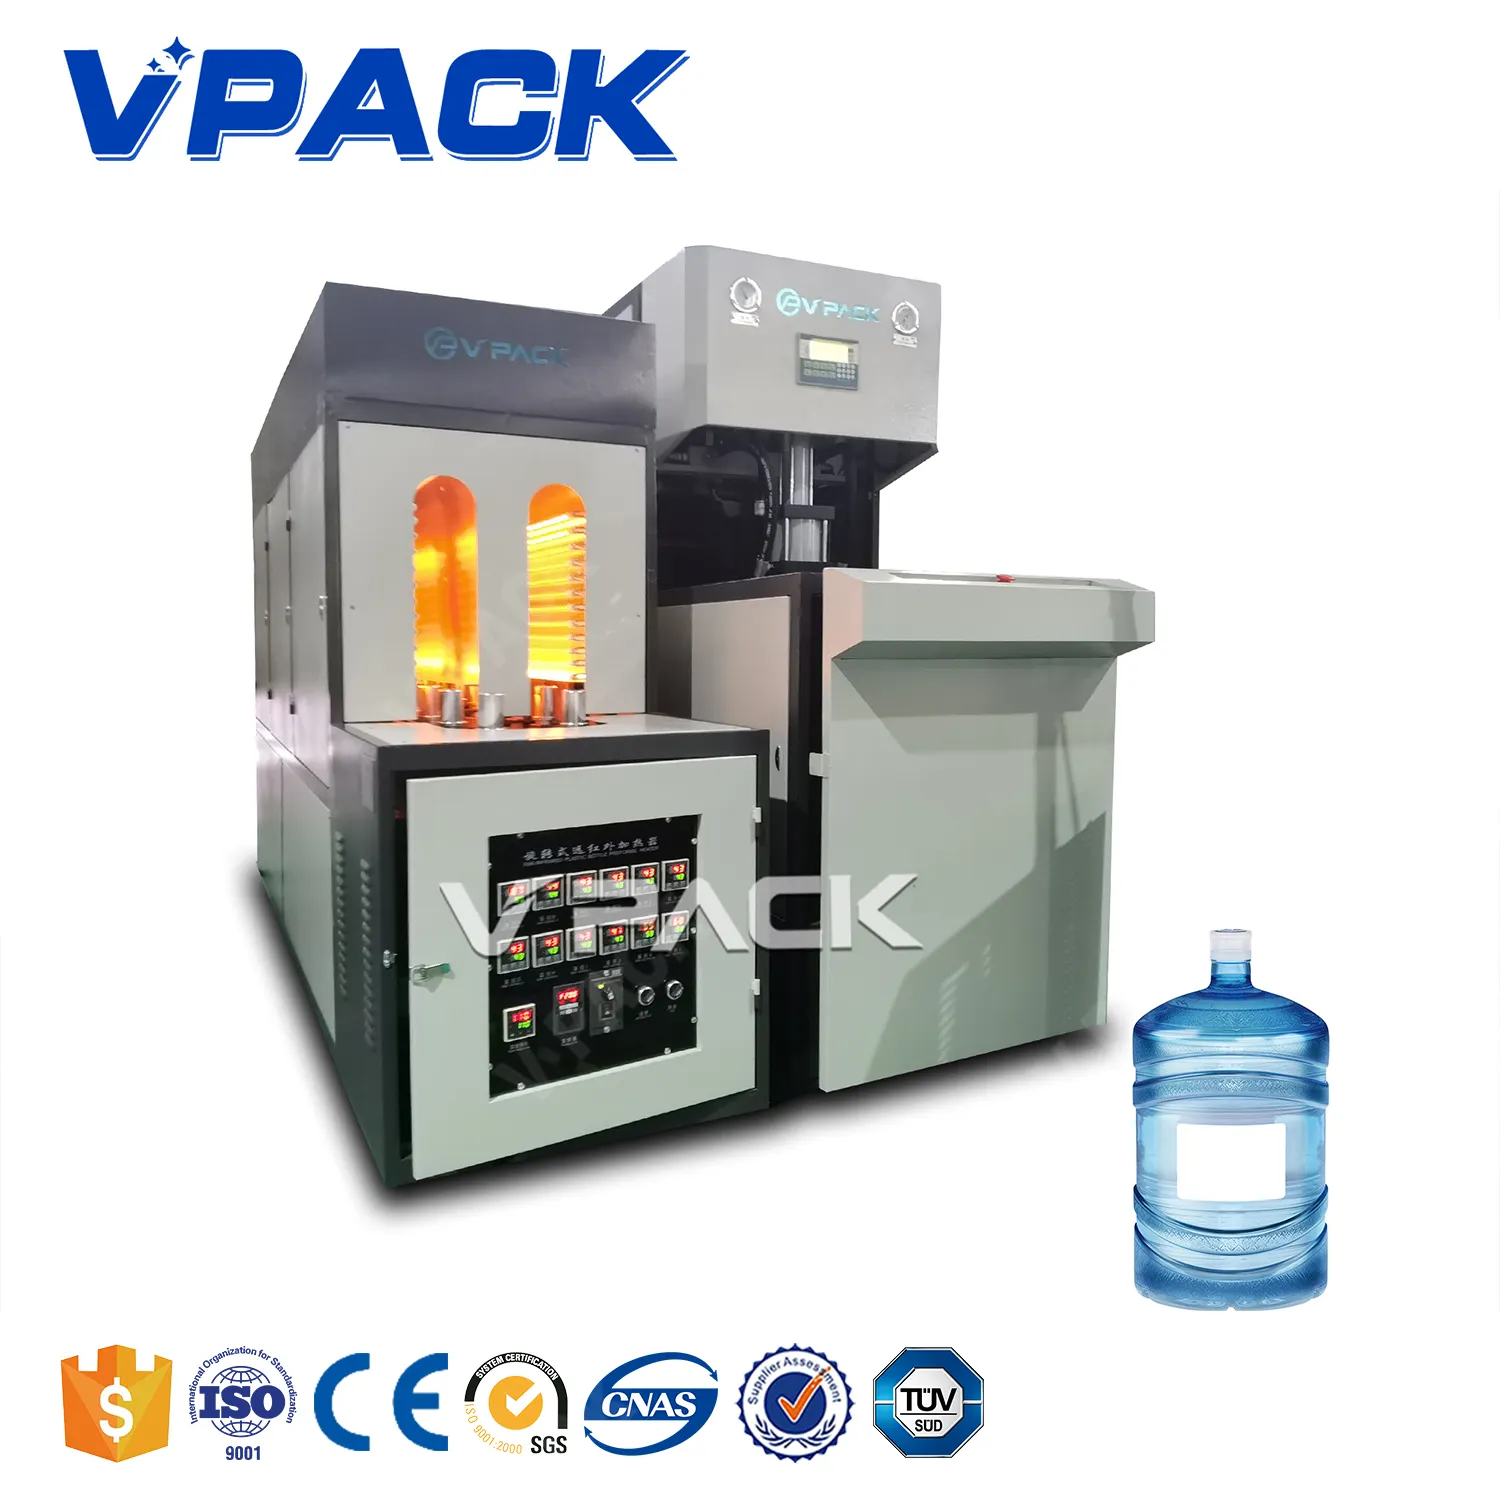 5 Gallon Pure Water Bucket Blow Molding Machine 5 gallon PET bottle forming machine easy to use High safety factor